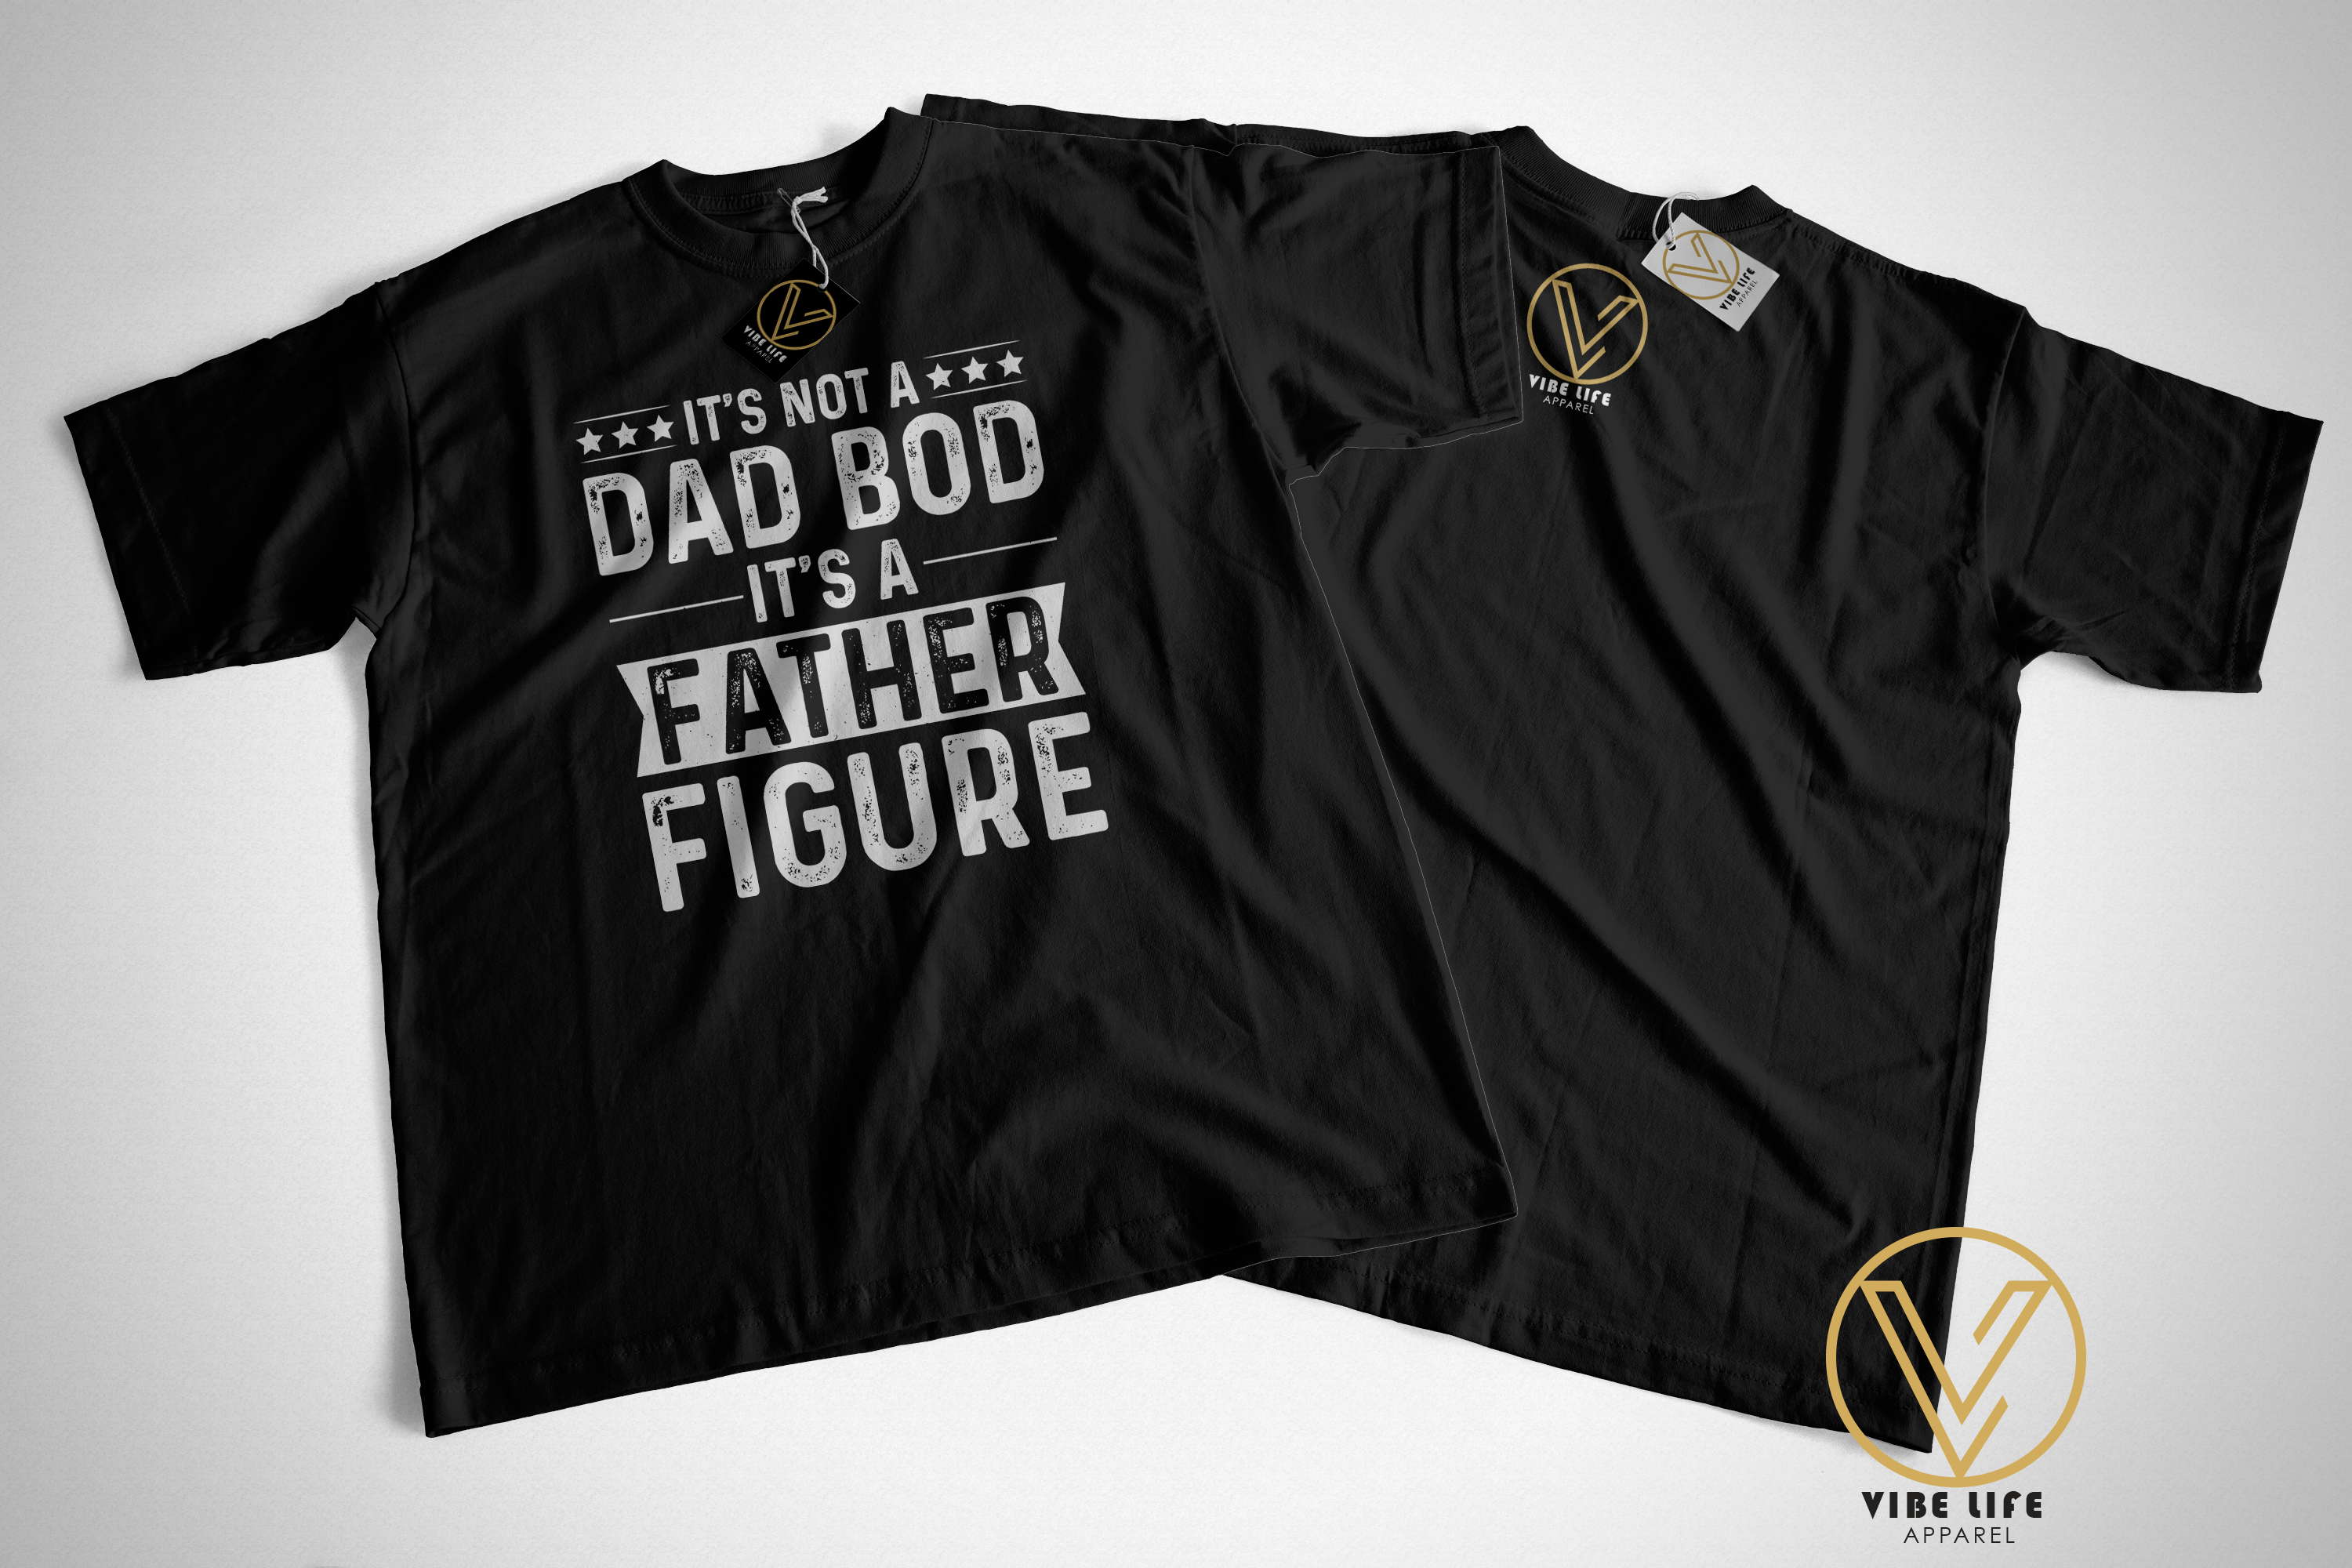 It's Not a Dad Bod - It's a Father Figure - Unisex Softstyle Crewneck Tee